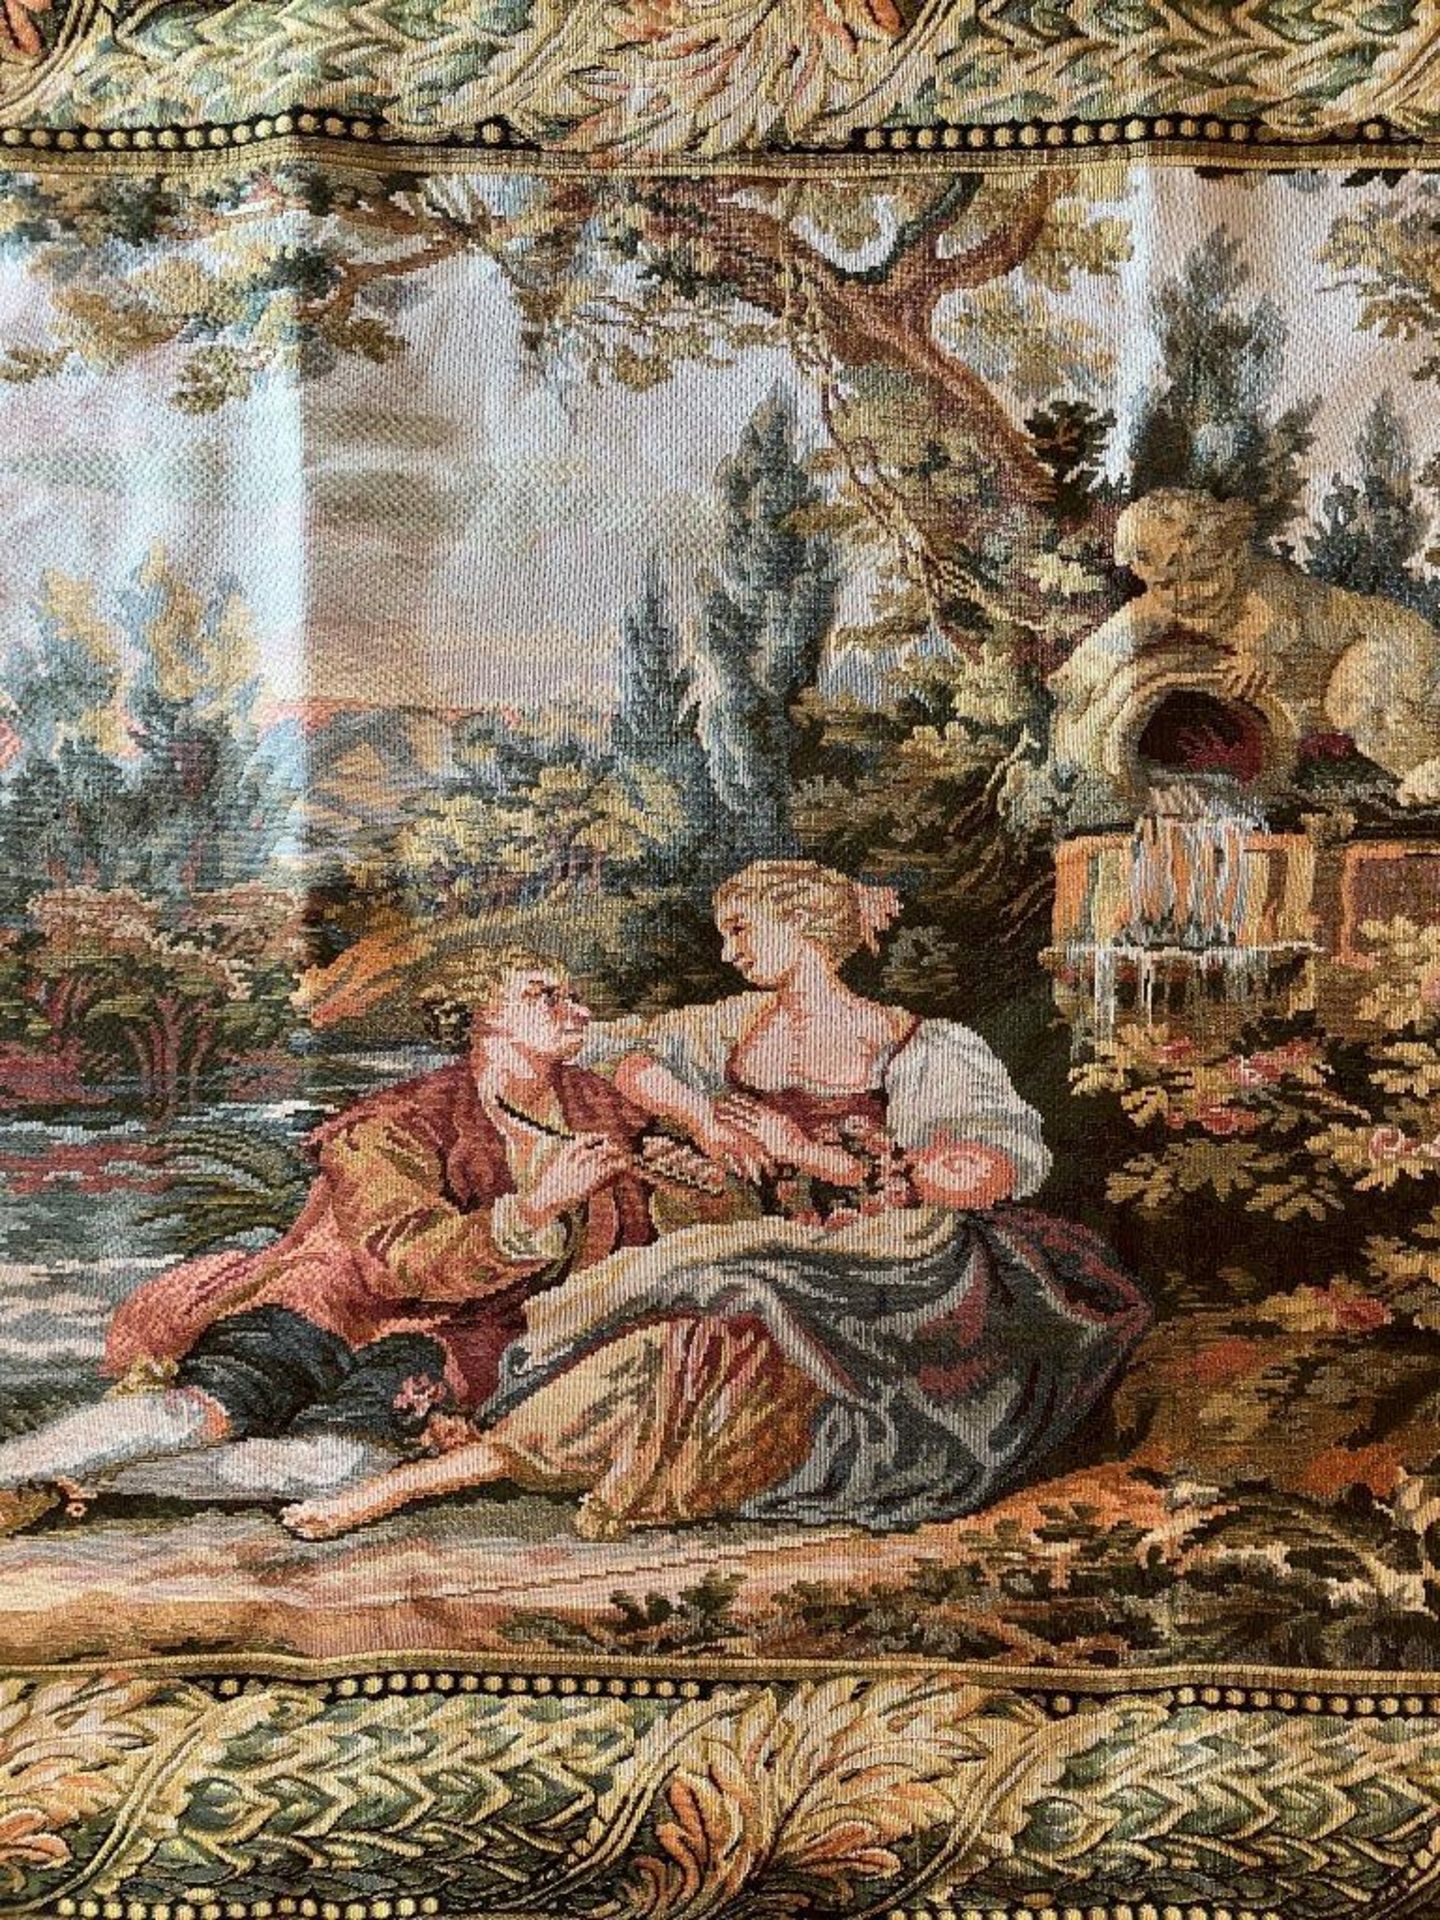 TAPESTRY WALL HANGING - Image 4 of 4